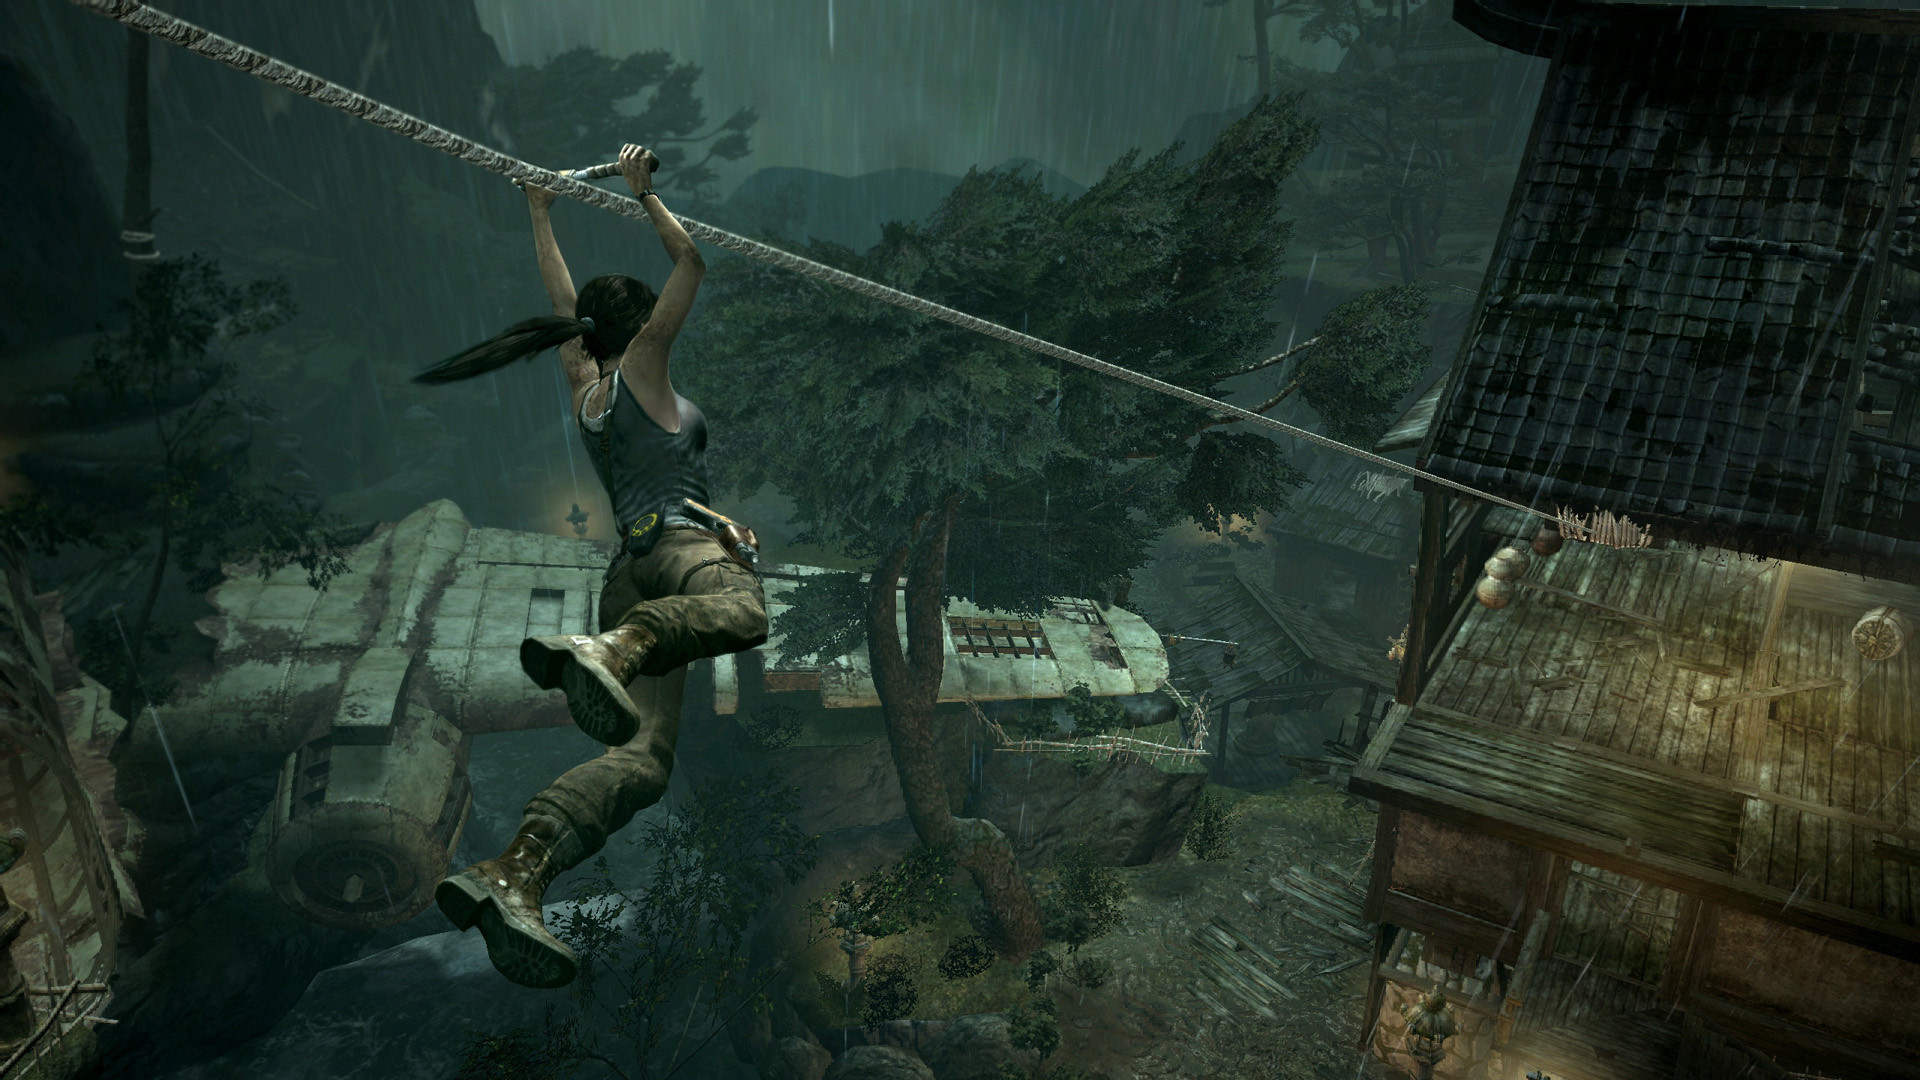 Tomb Raider review: new Lara Croft is worth watching, not just